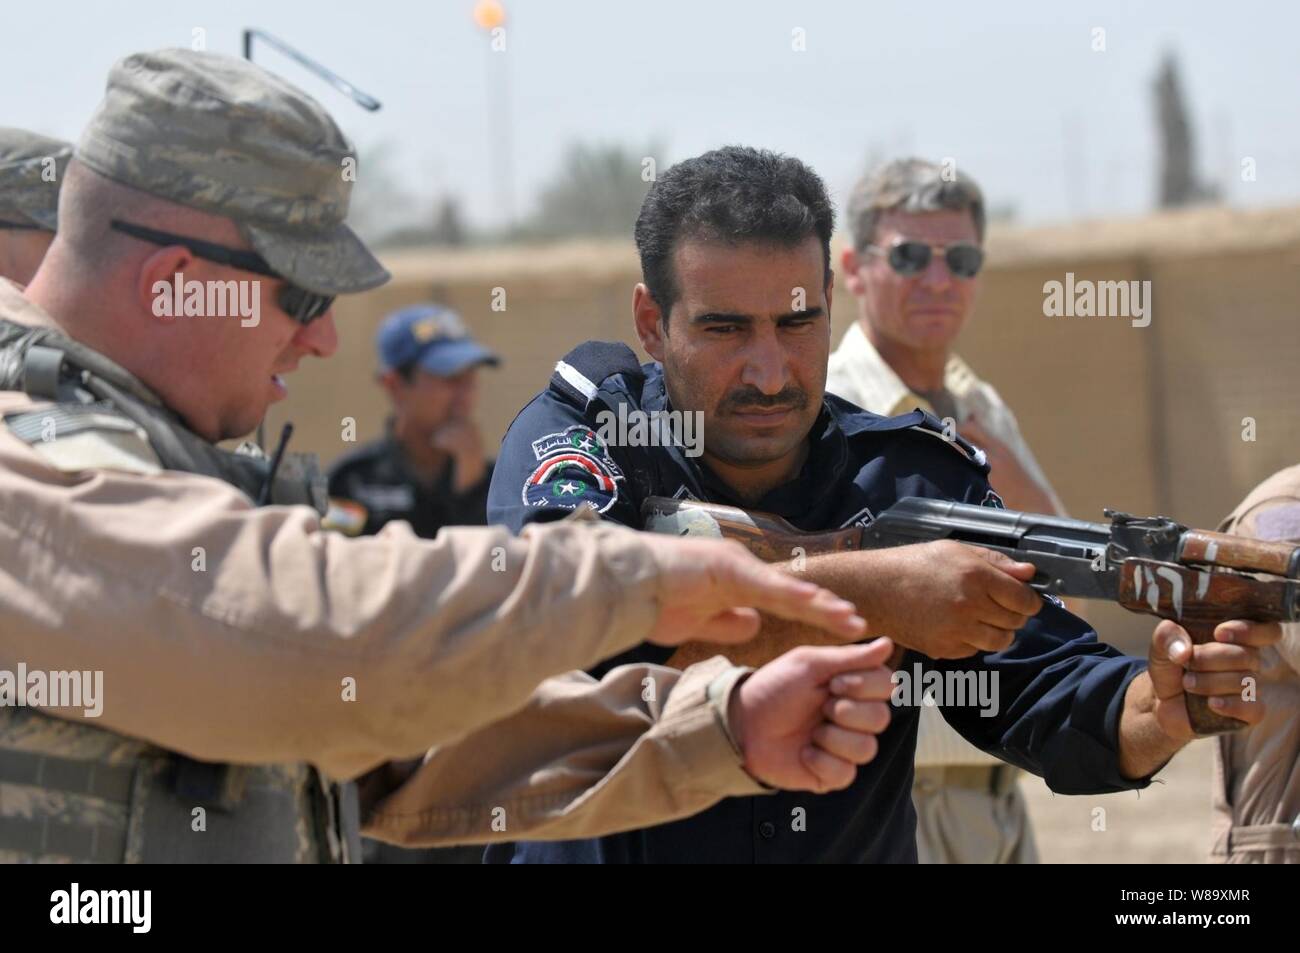 A U.S. Air Force airman with the 732nd Expeditionary Security Forces Squadron, attached to the 93rd Military Police Battalion, instructs an Iraqi Police officer from the Abu Ghraib district during range training at Forward Operating Base Mahmudiyah, Iraq, on July 8, 2009. Stock Photo